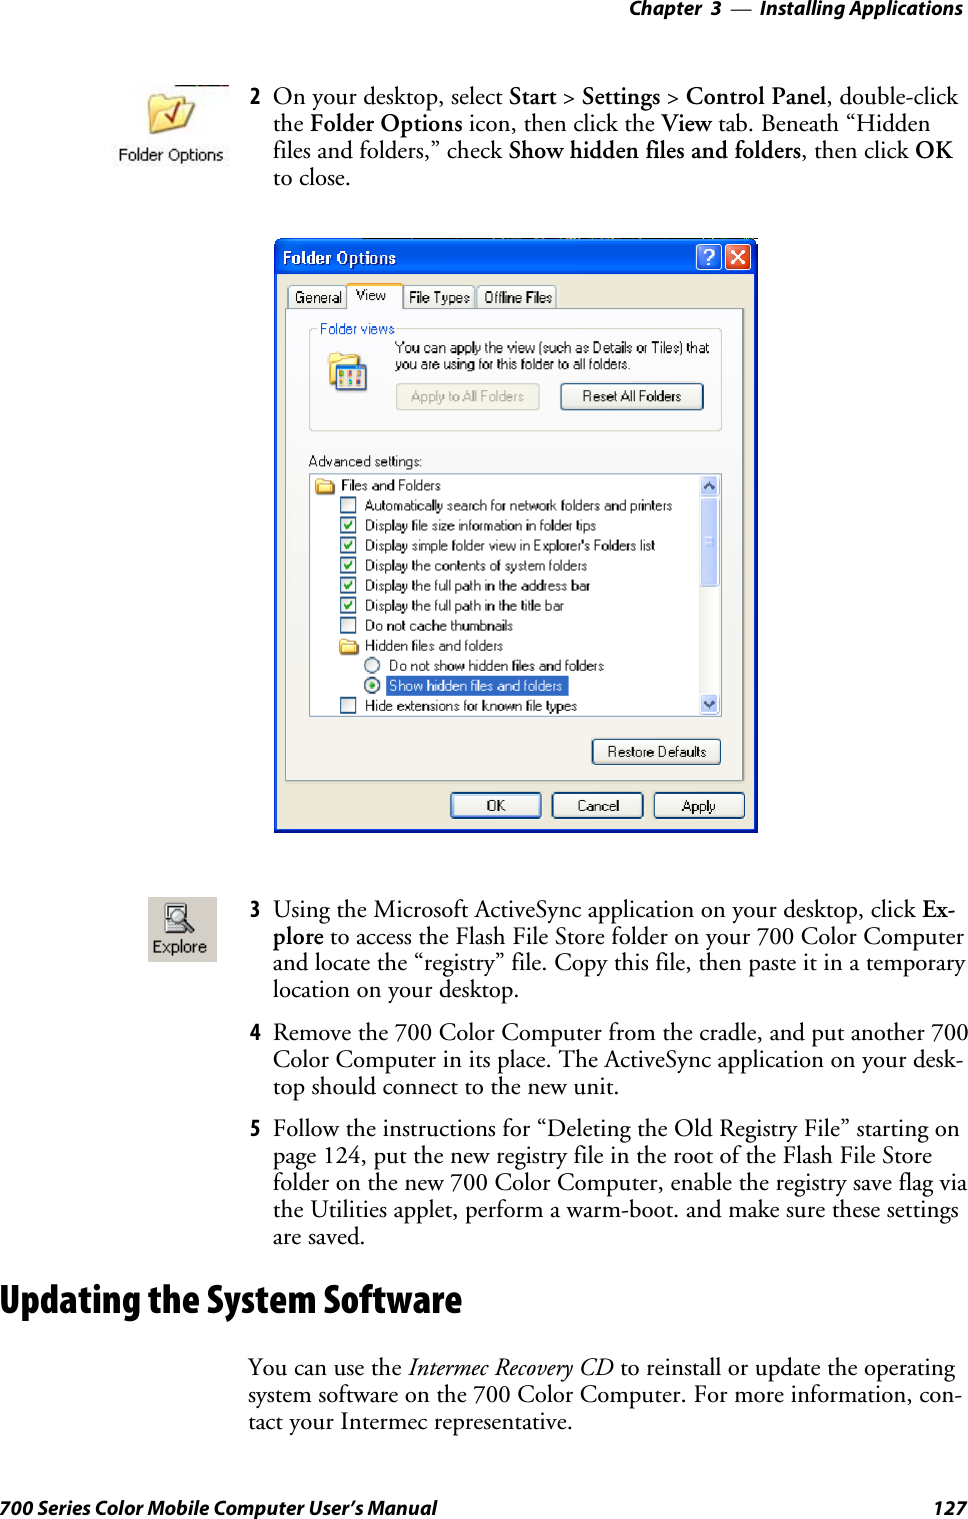 Installing Applications—Chapter 3127700 Series Color Mobile Computer User’s Manual2On your desktop, select Start &gt;Settings &gt;Control Panel,double-clickthe Folder Options icon, then click the View tab. Beneath “Hiddenfiles and folders,” check Show hidden files and folders,thenclickOKto close.3Using the Microsoft ActiveSync application on your desktop, click Ex-plore to access the Flash File Store folder on your 700 Color Computerand locate the “registry” file. Copy this file, then paste it in a temporarylocation on your desktop.4Remove the 700 Color Computer from the cradle, and put another 700Color Computer in its place. The ActiveSync application on your desk-top should connect to the new unit.5Follow the instructions for “Deleting the Old Registry File” starting onpage 124, put the new registry file in the root of the Flash File Storefolder on the new 700 Color Computer, enable the registry save flag viathe Utilities applet, perform a warm-boot. and make sure these settingsare saved.Updating the System SoftwareYou can use the Intermec Recovery CD to reinstall or update the operatingsystem software on the 700 Color Computer. For more information, con-tact your Intermec representative.